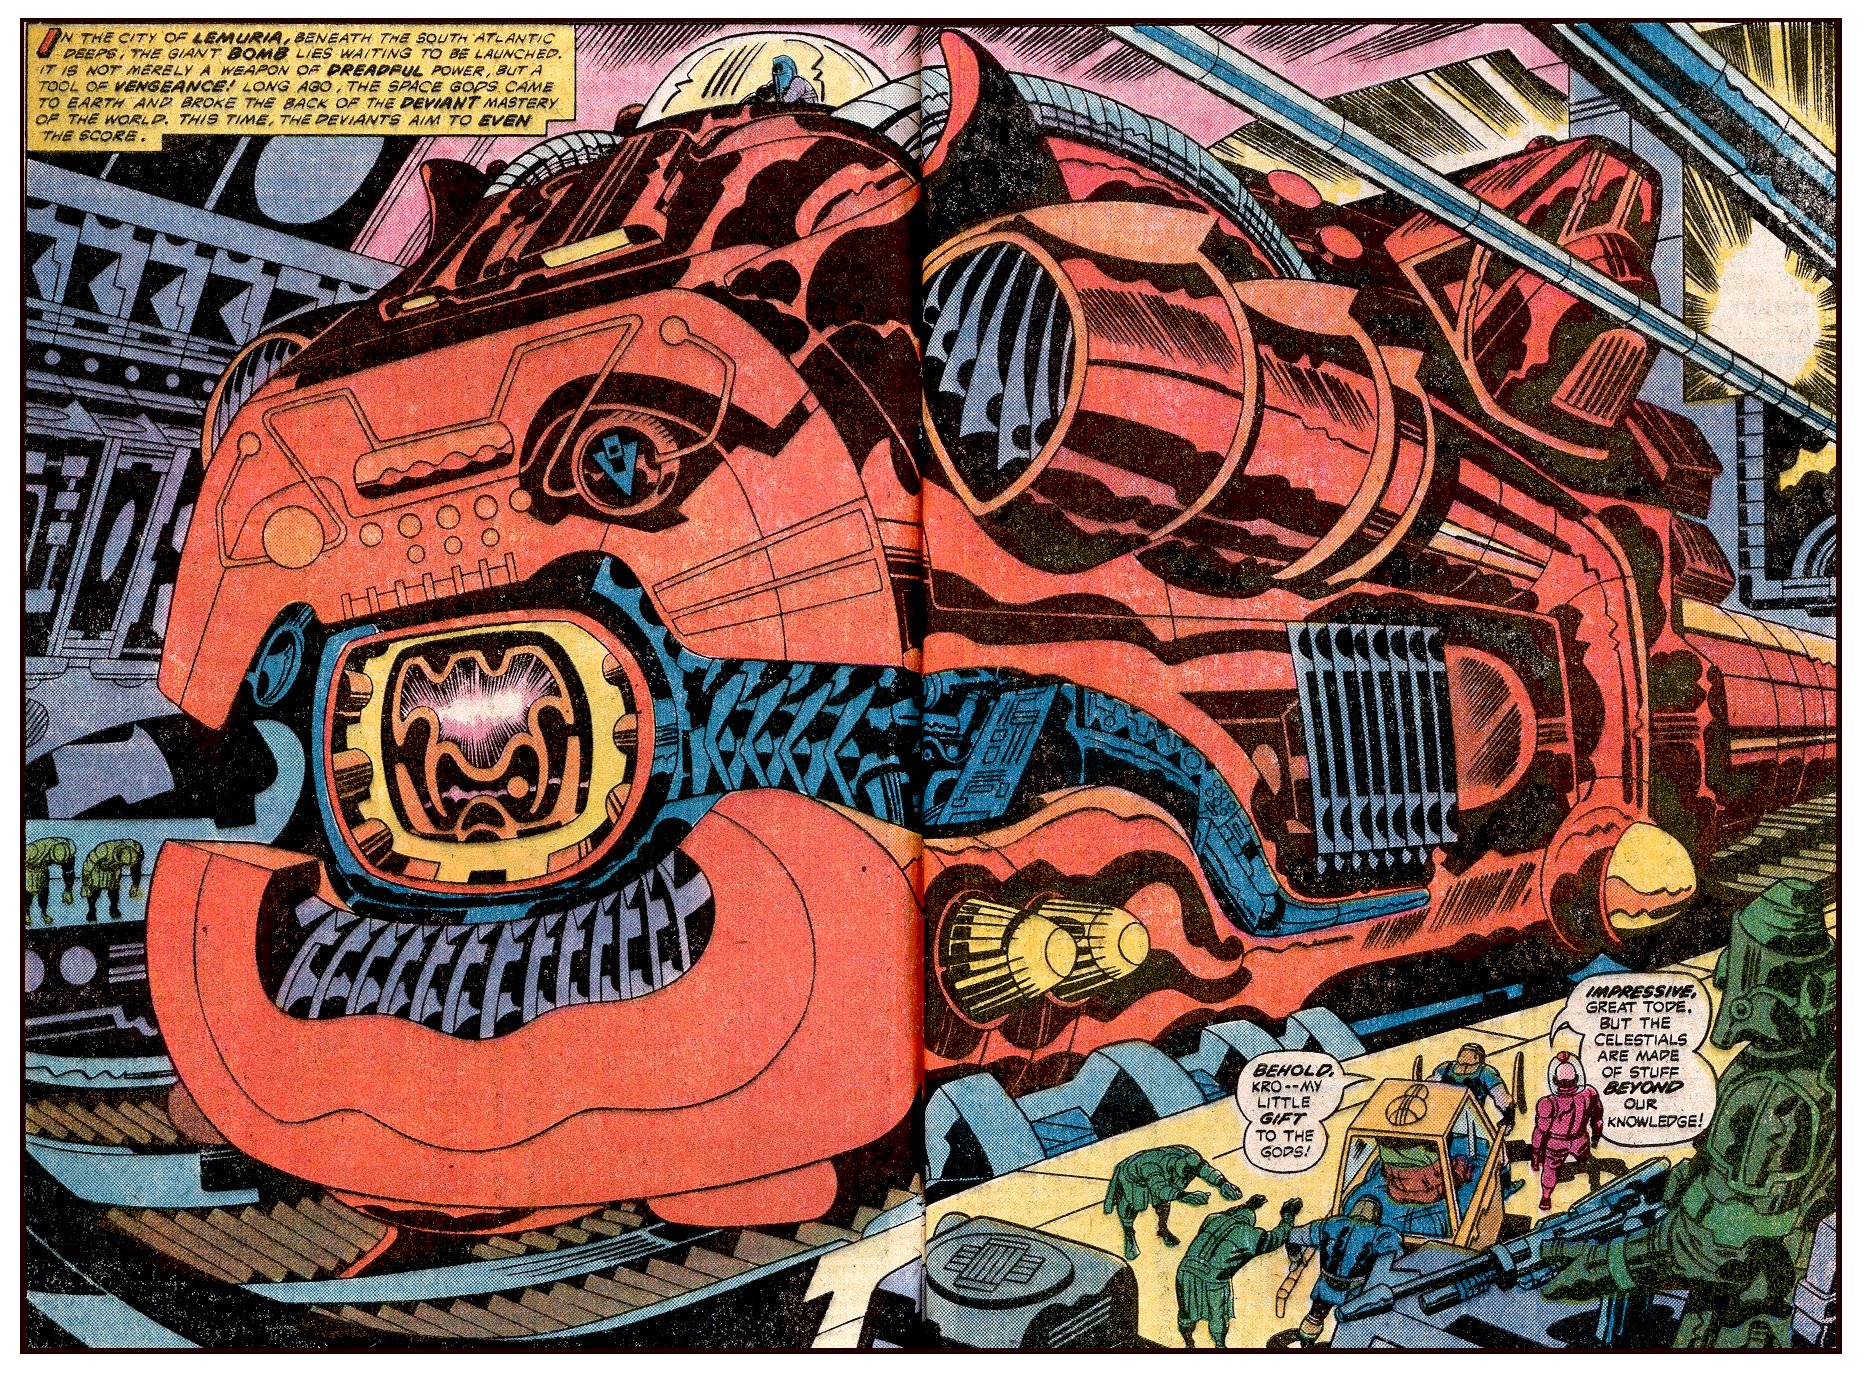 Comic book open to a double-page image showing an enormous red machine. Smaller figures are in the foreground. Speech bubble reads "BEHOLD, KRO -- MY LITTLE GIFT TO THE GODS"